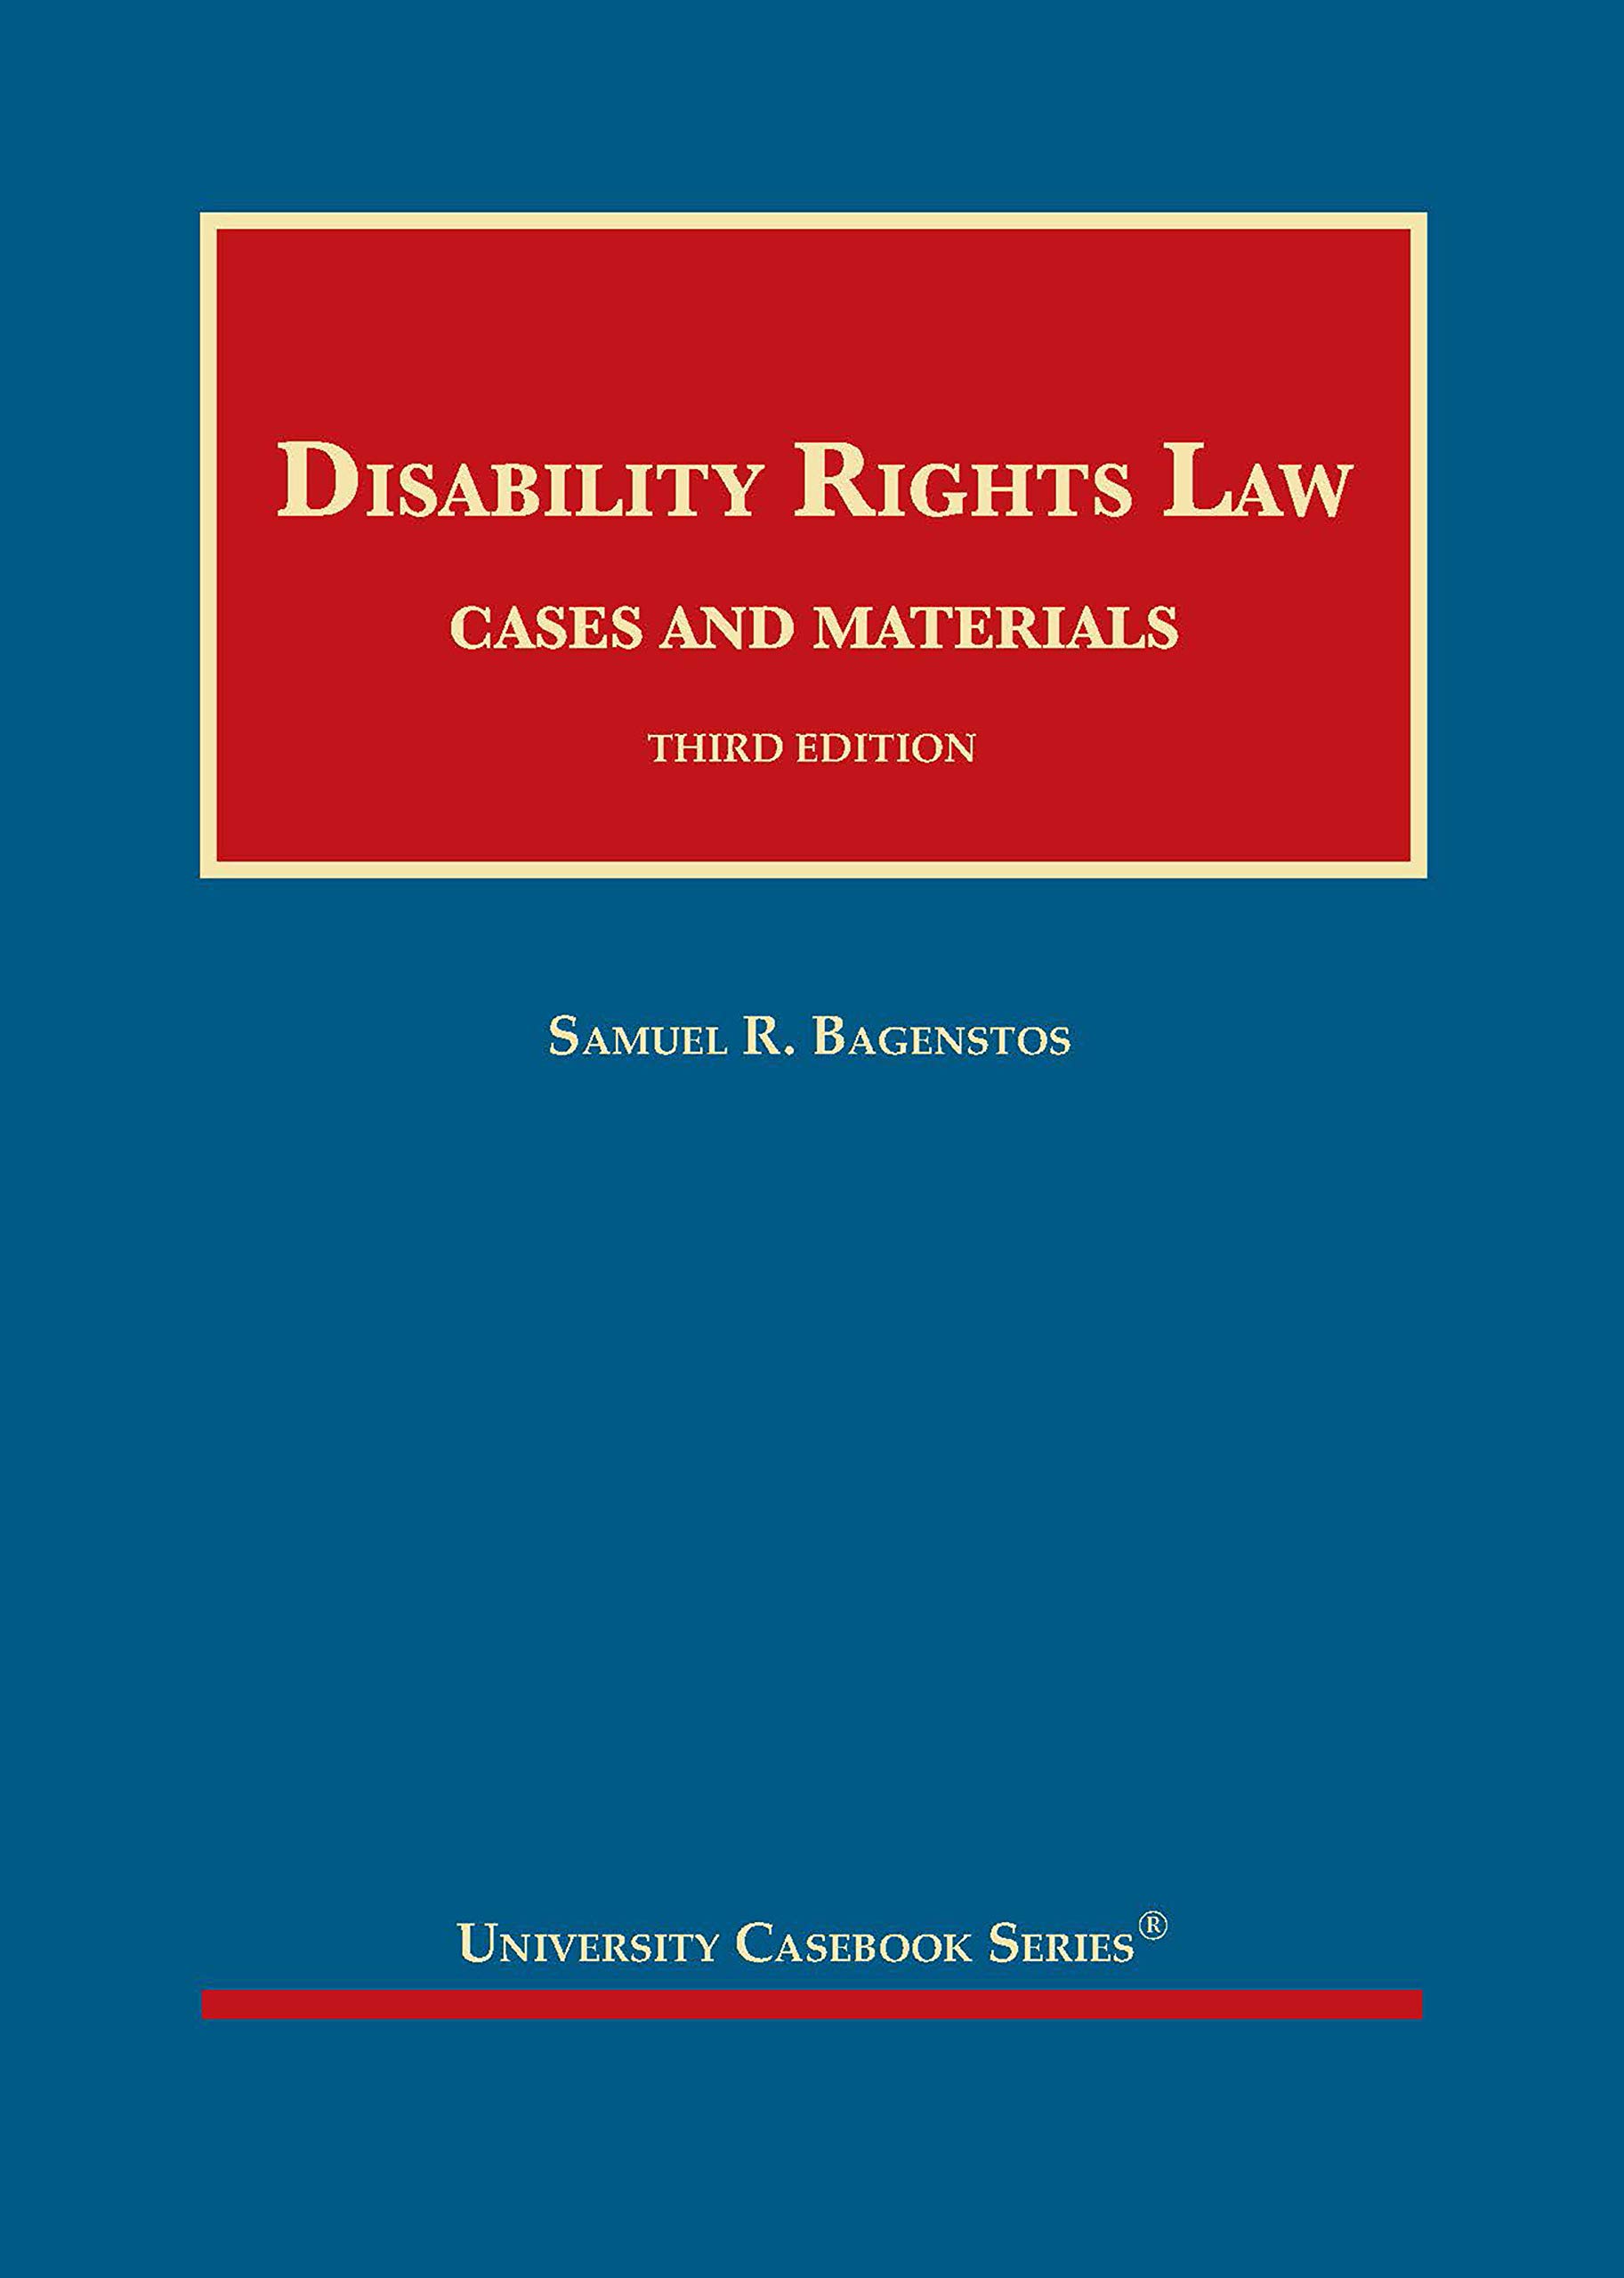 Disability Rights Law, Cases and Materials (University Casebook Series)